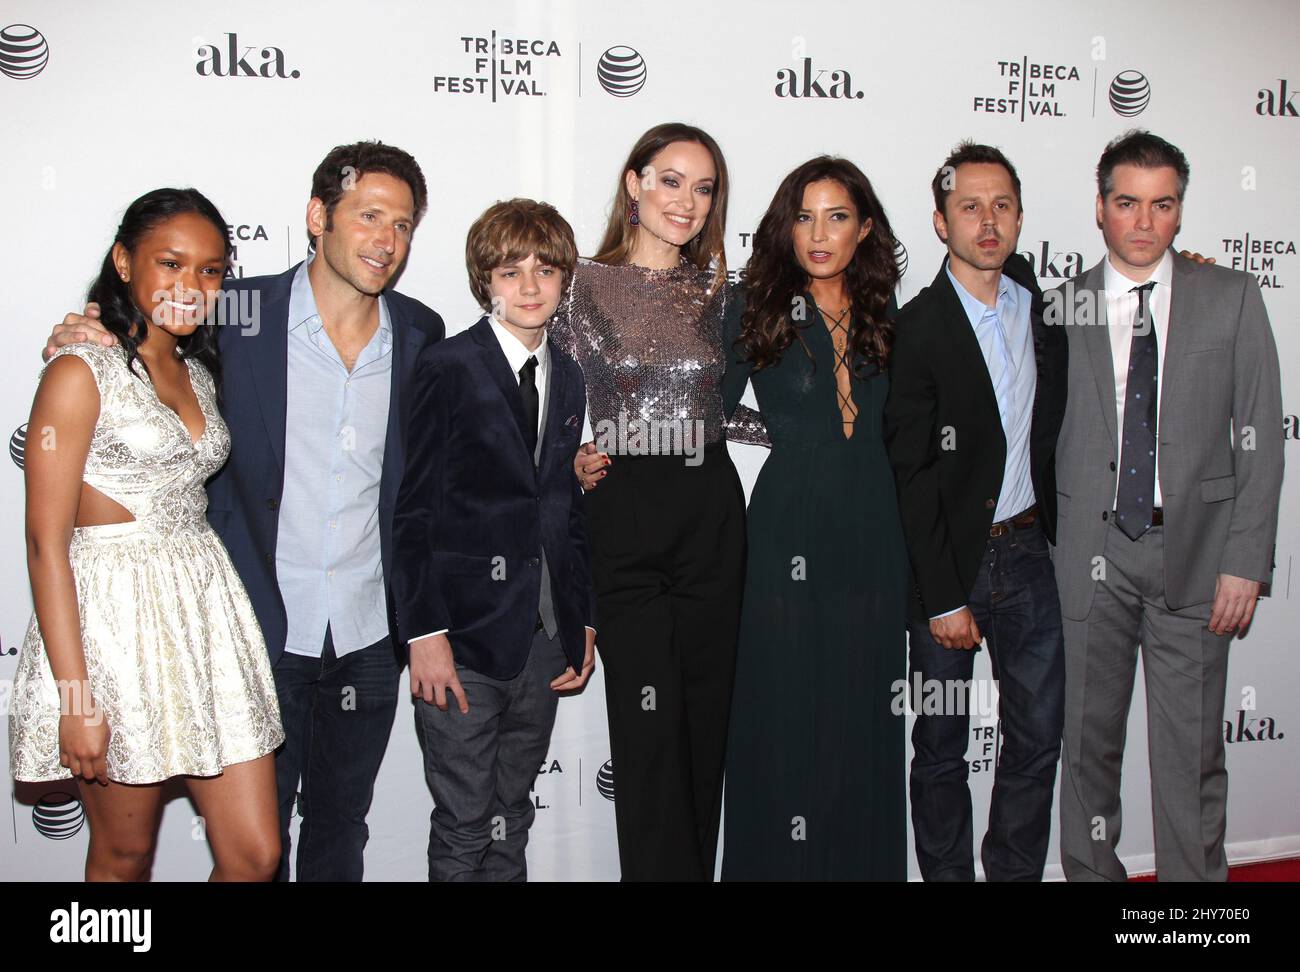 Eden Duncan-Smith, Mark Feuerstein, Ty Simpkins, Olivia Wilde, Reed Morano attending the premiere of Narrative: Meadowland held at the SVA Theater in New York. Stock Photo